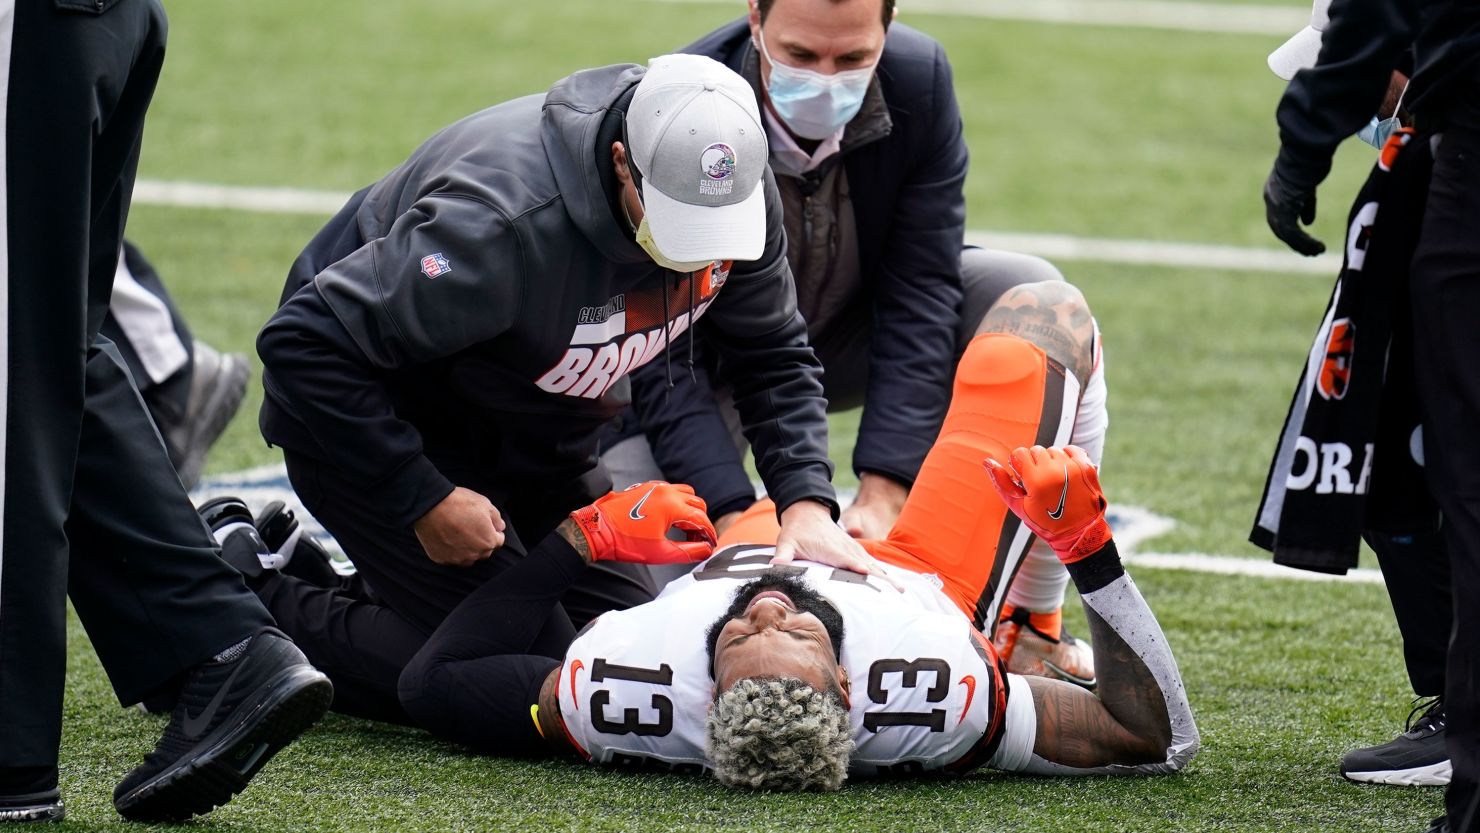 Odell Beckham Jr suffered a torn ACL and will miss the rest of the season.